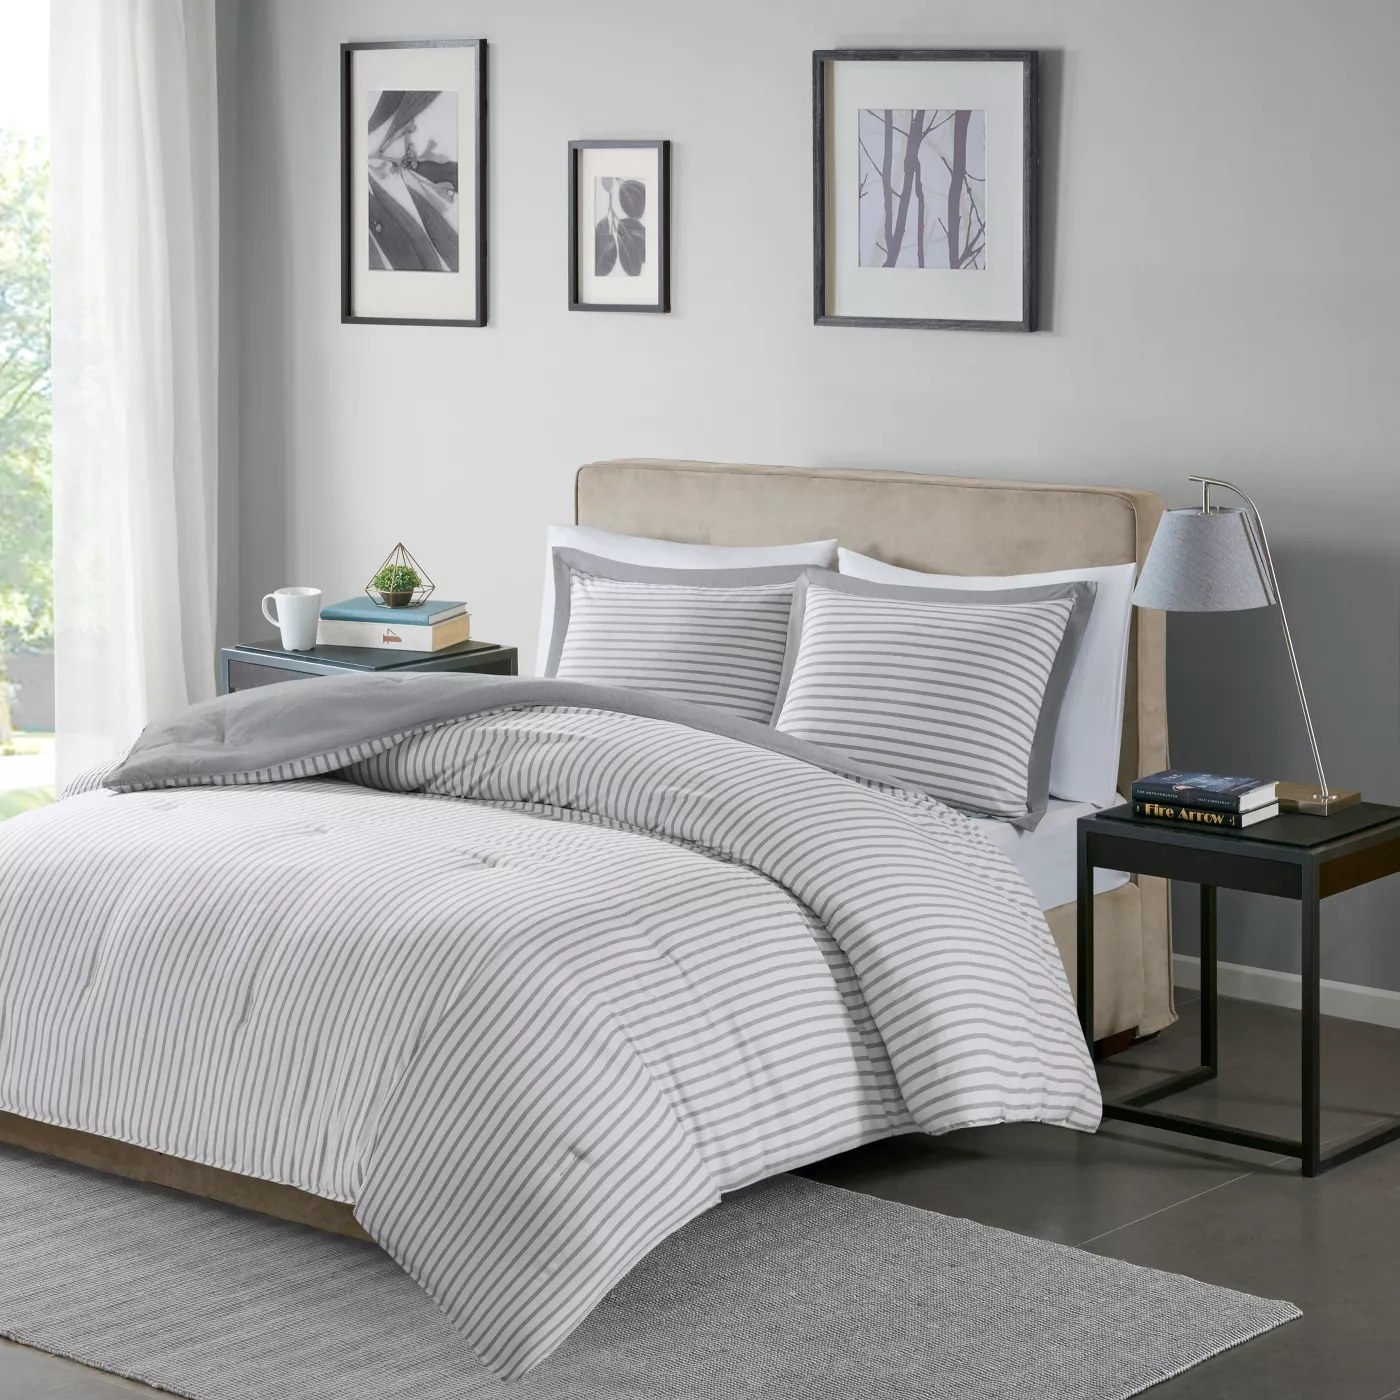 The striped, reversible comforter and shams